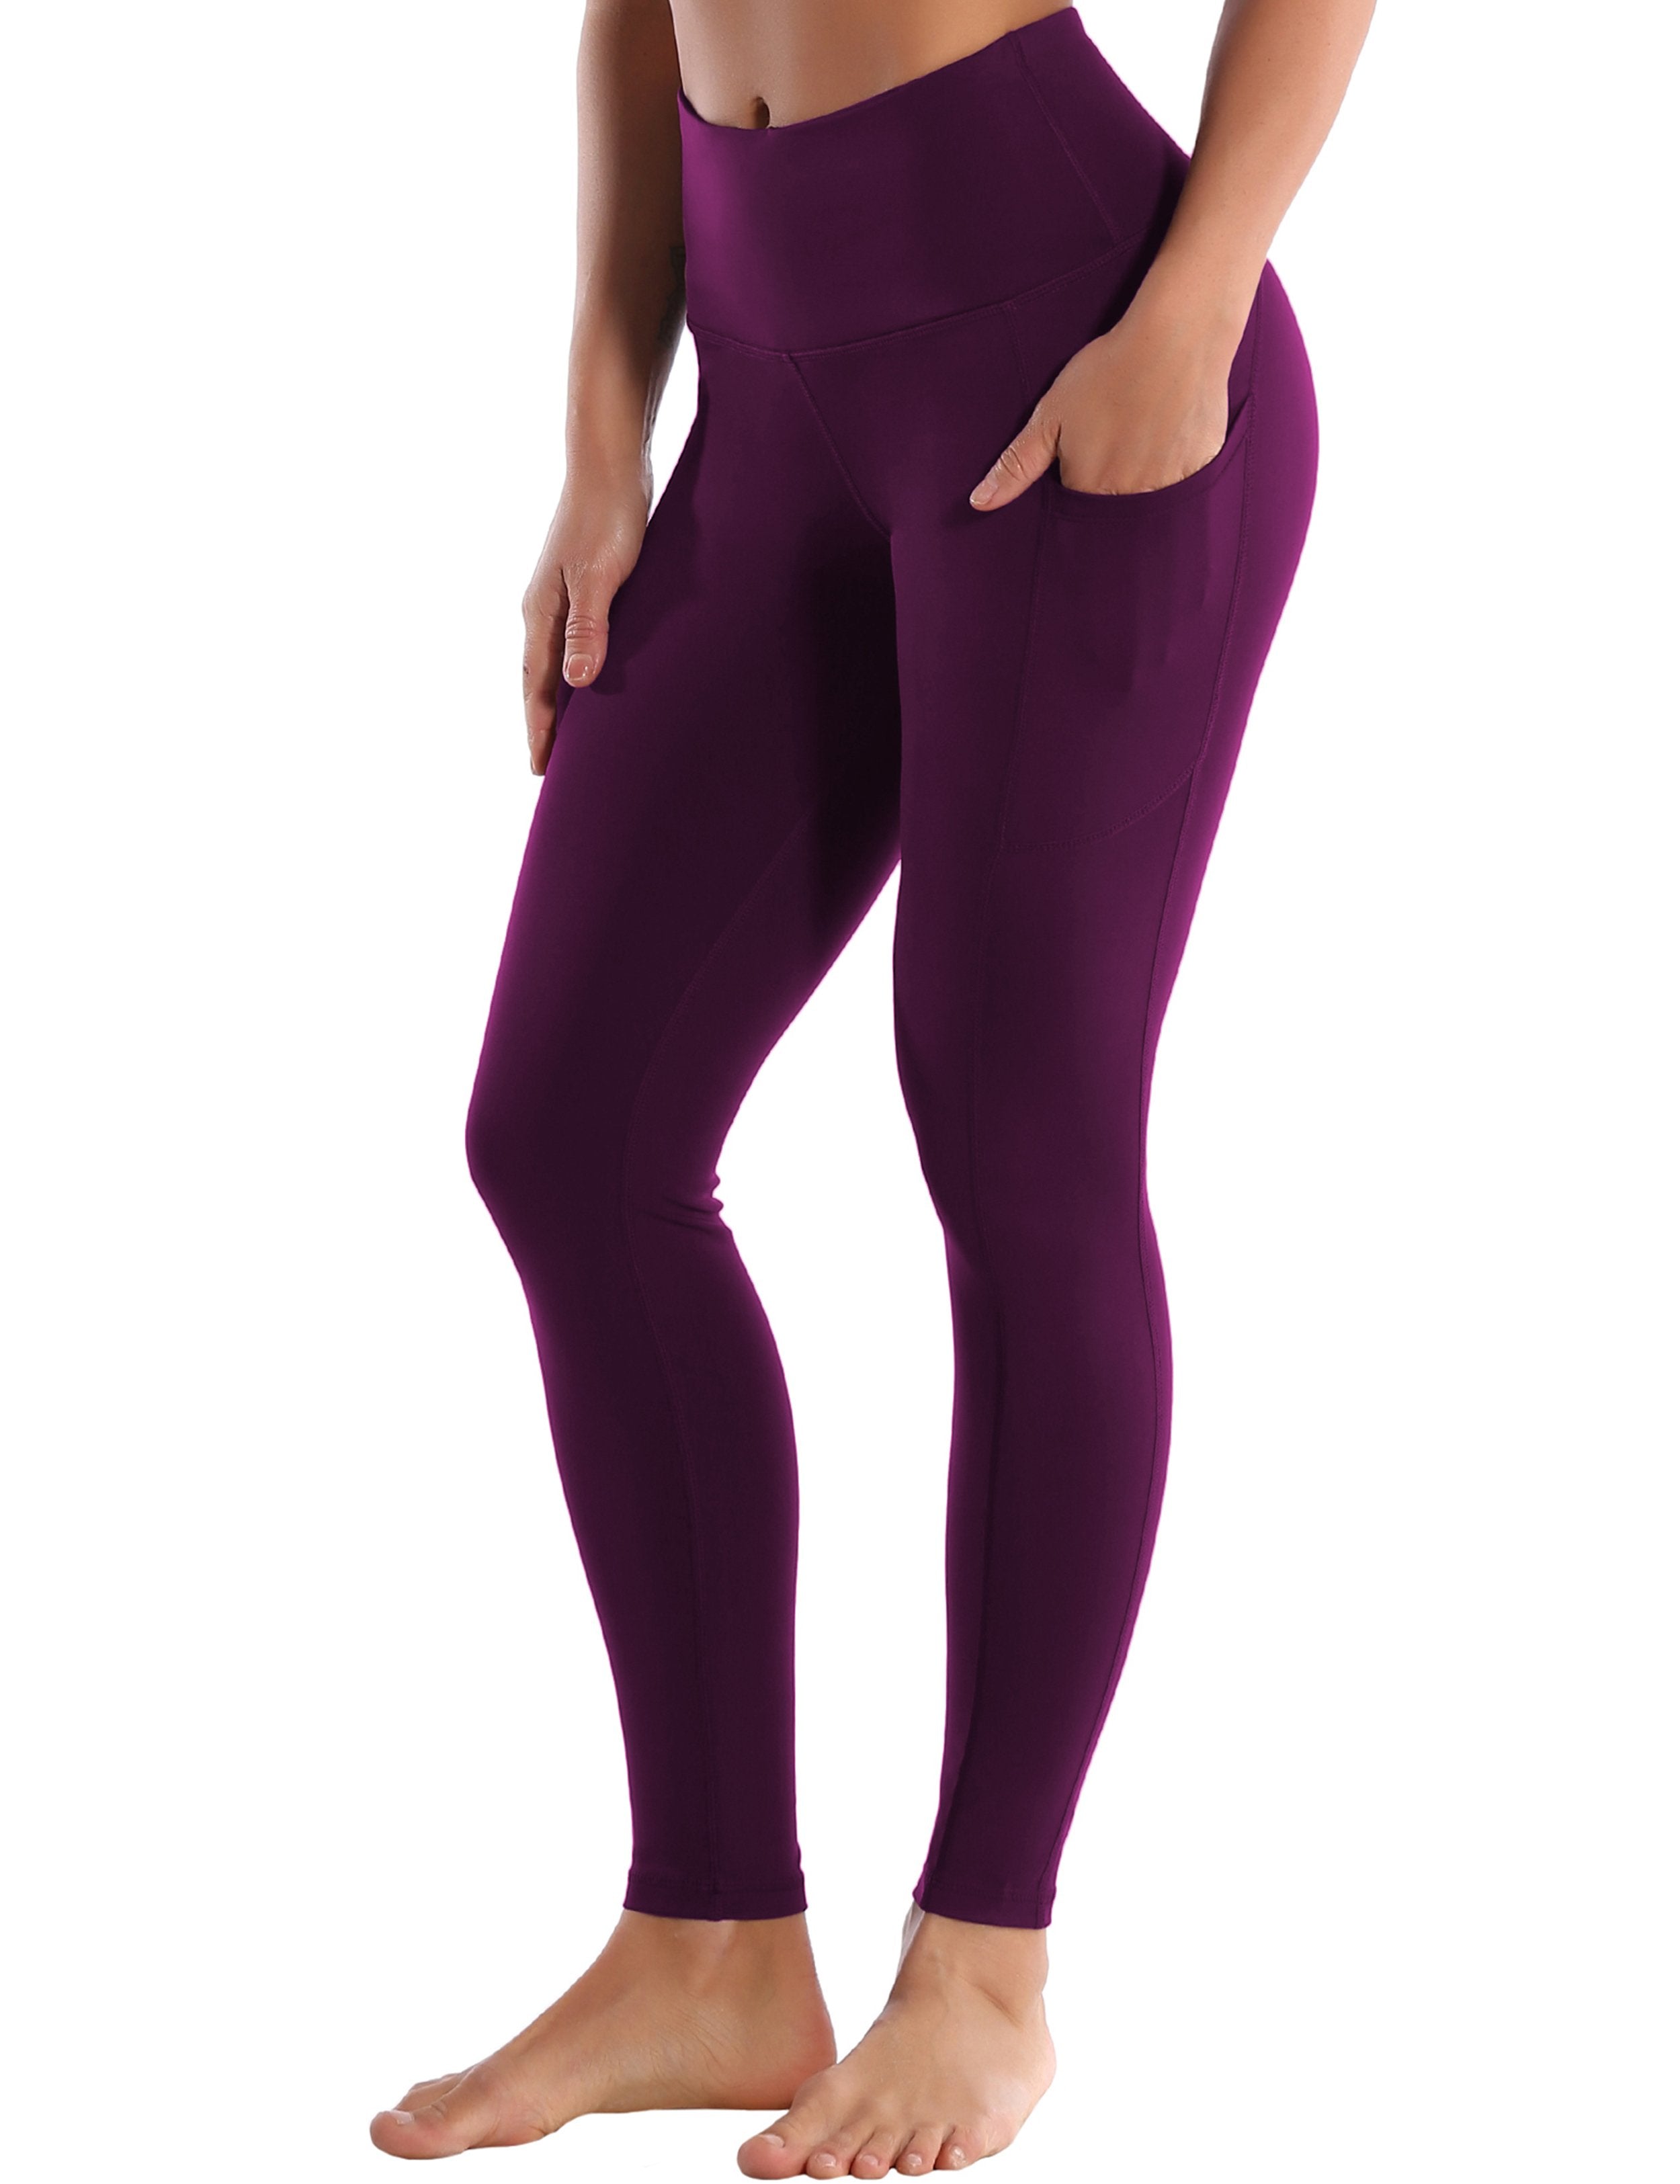 Hip Line Side Pockets Running Pants grapevine Sexy Hip Line Side Pockets 75%Nylon/25%Spandex Fabric doesn't attract lint easily 4-way stretch No see-through Moisture-wicking Tummy control Inner pocket Two lengths